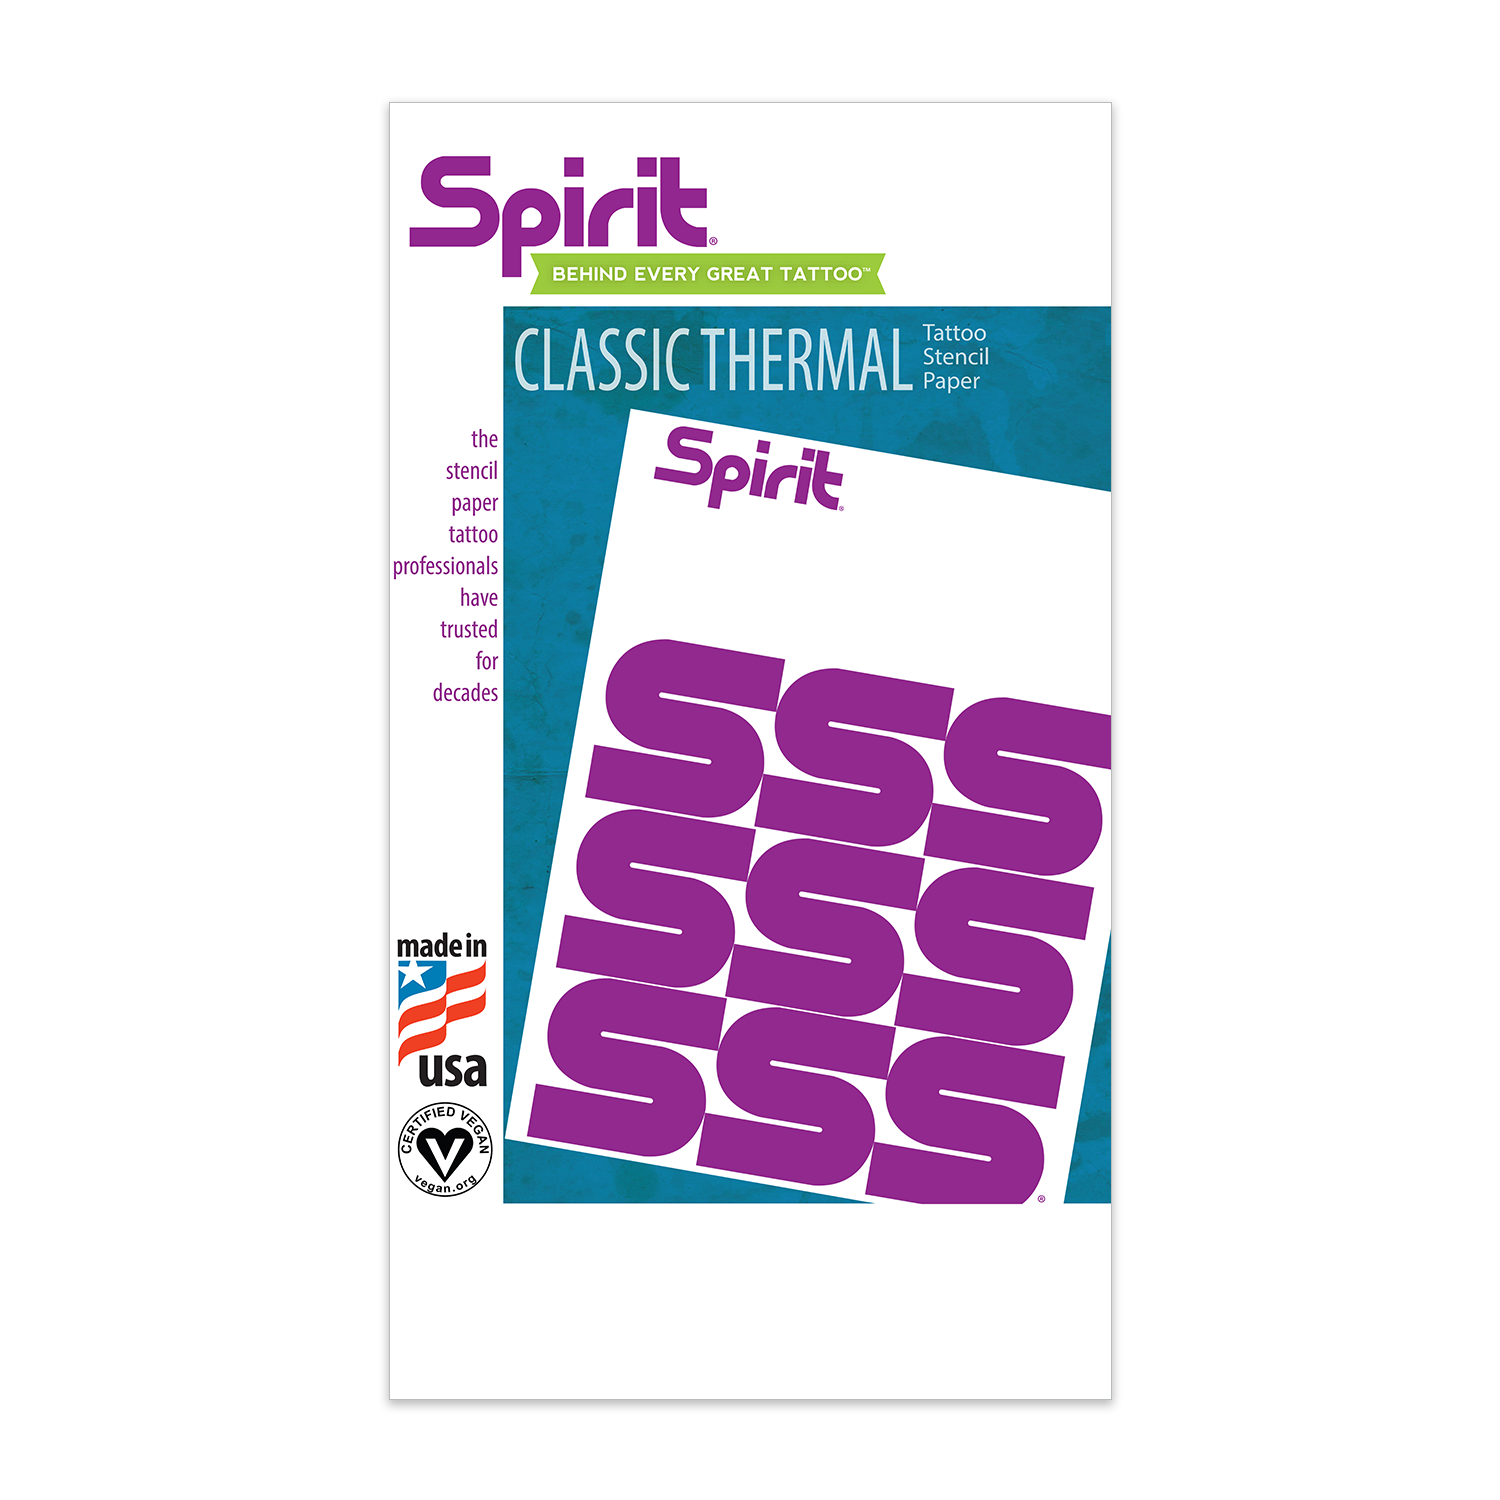 Spirit™ Tattoo Products on Instagram: Spirit Classic Thermal Paper and  Transfer Cream are available through many of our trusted retailers and  through spirittattooproducts.com! #spirittattooproducts #reprofx  #reprofxspirit #spiritpaper #spiritstencil